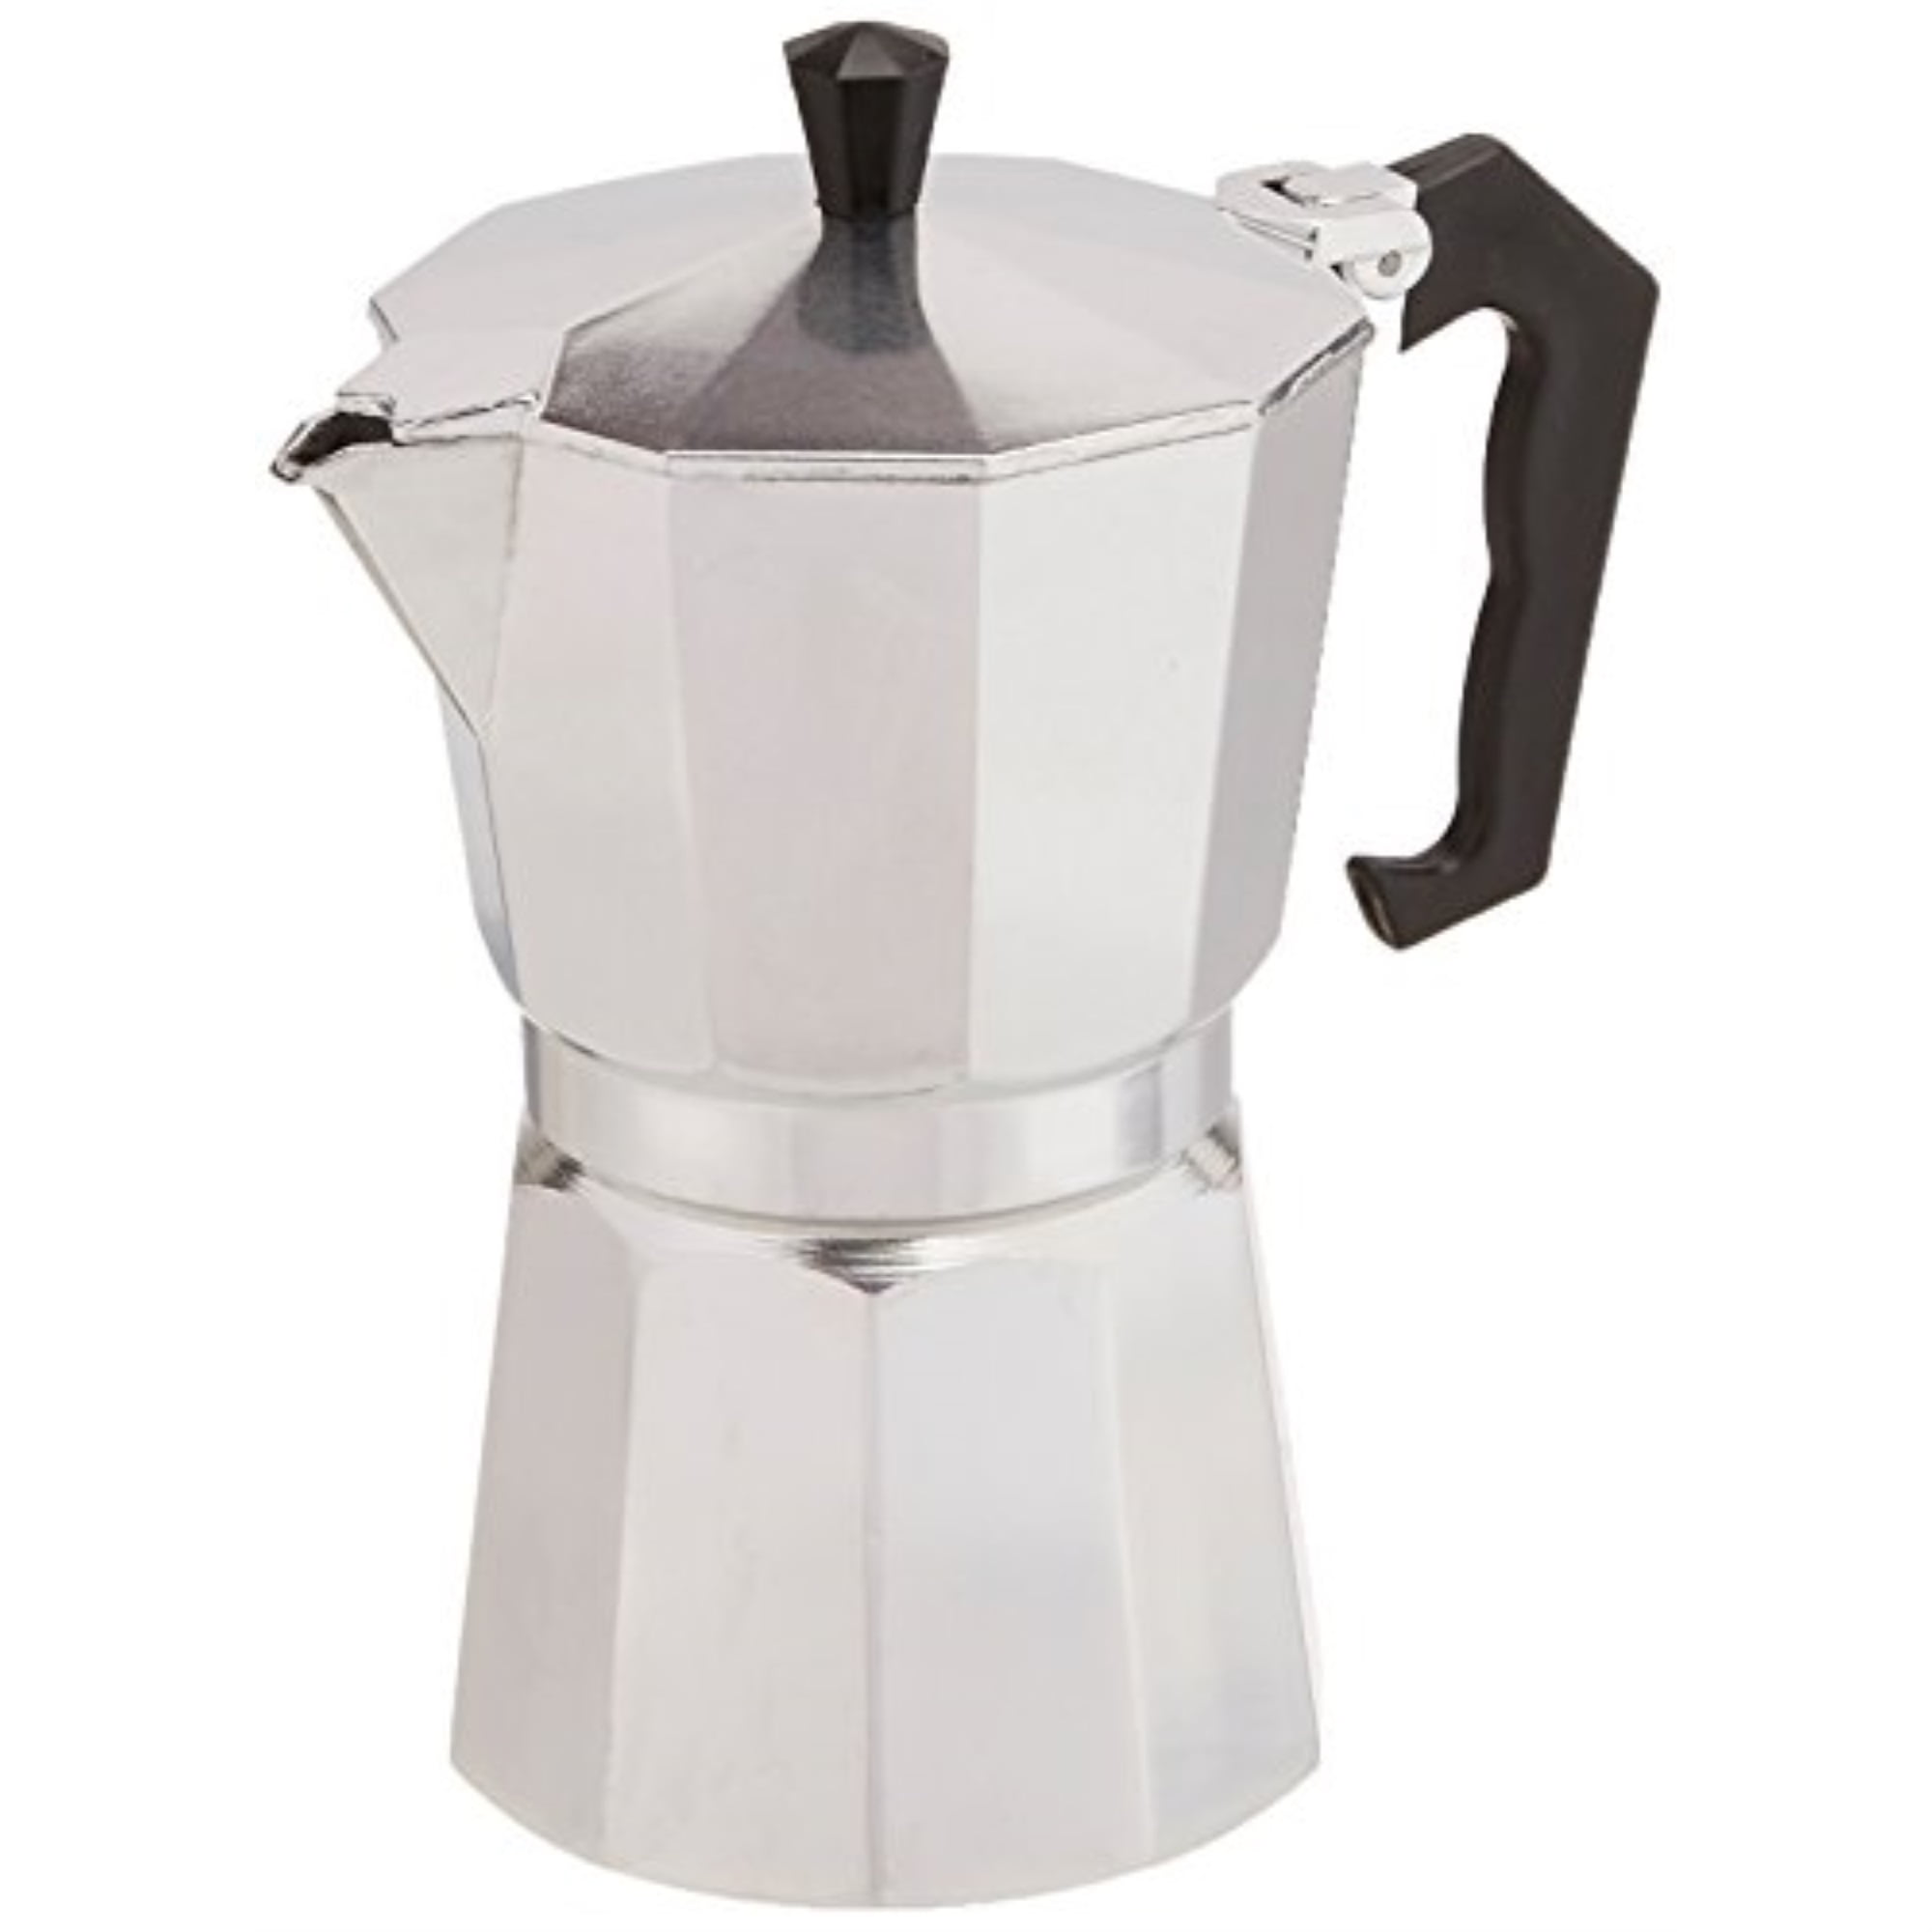 Primula Stainless Stell Expresso Maker with Silicone Handle 6 Cup for sale online 